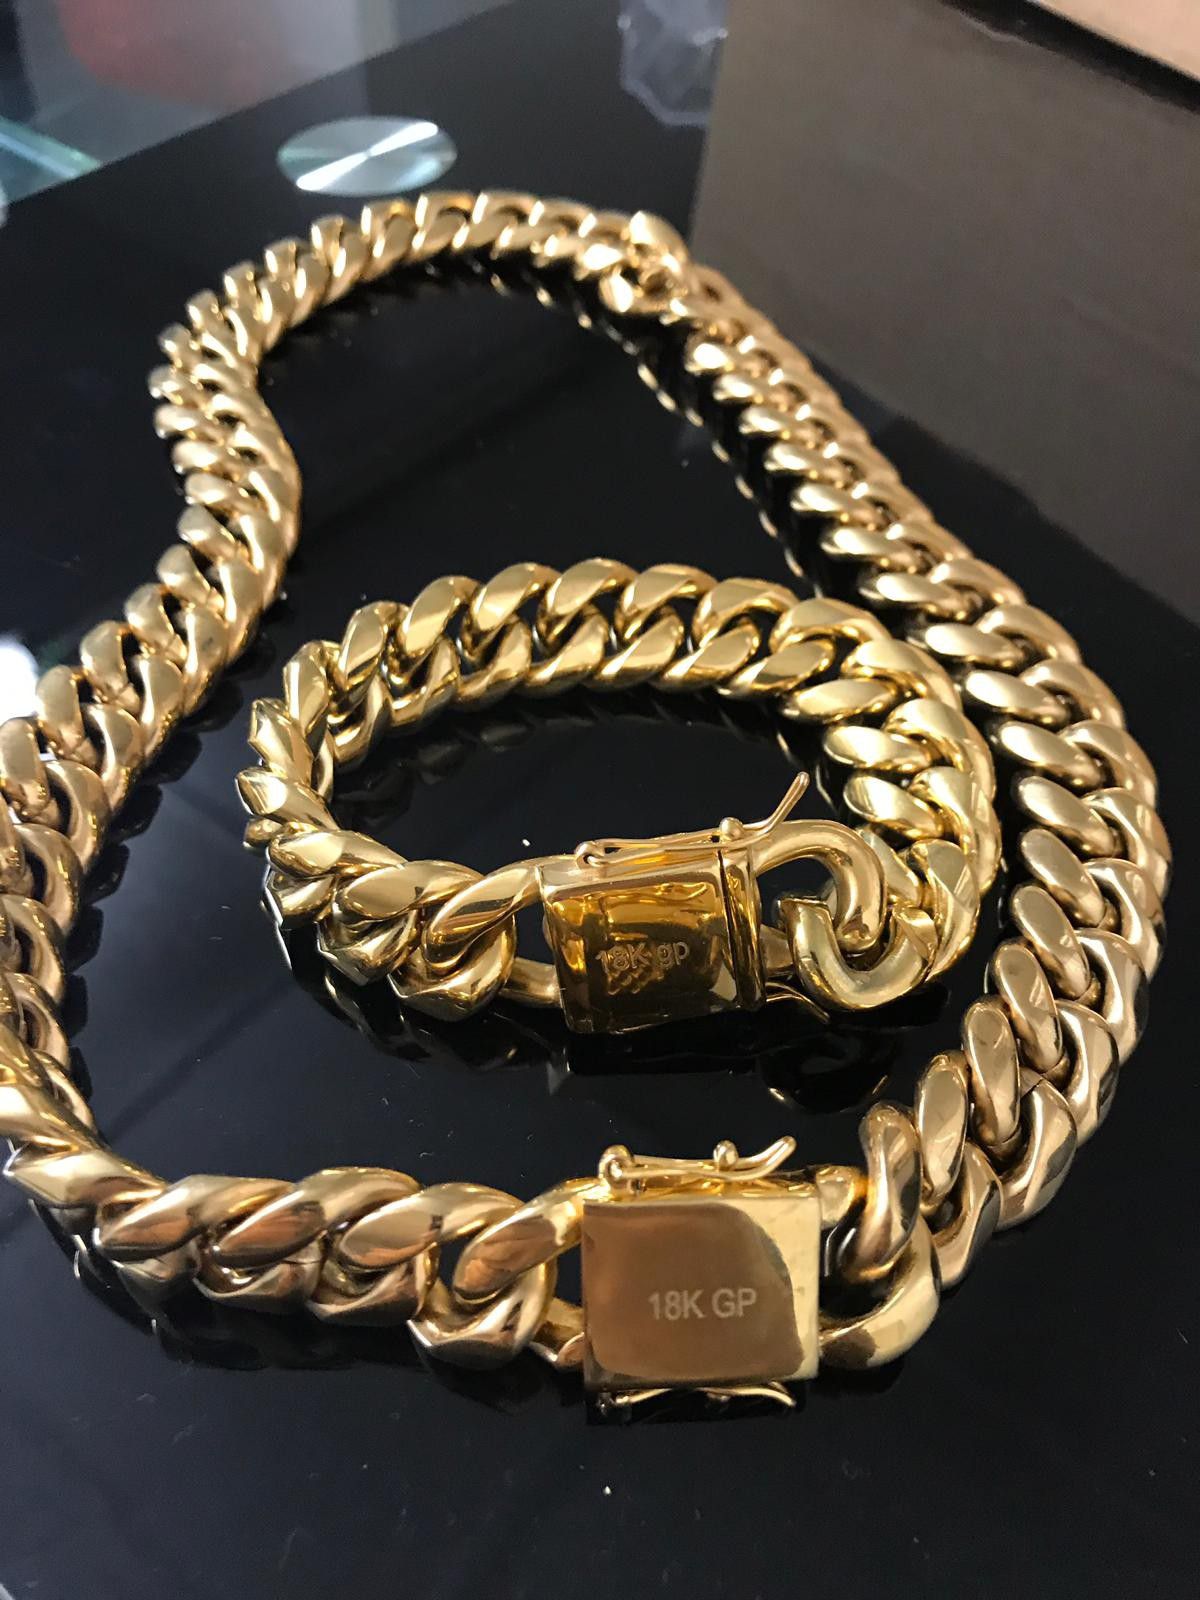 MIAMI CUBAN LINK MENS CHAIN 2 PIECE SET CHAIN & BRACELET 💯WILL NOT FADE OR TARNISH 🚗DELIVERIES AVAILABLE 18mm thick